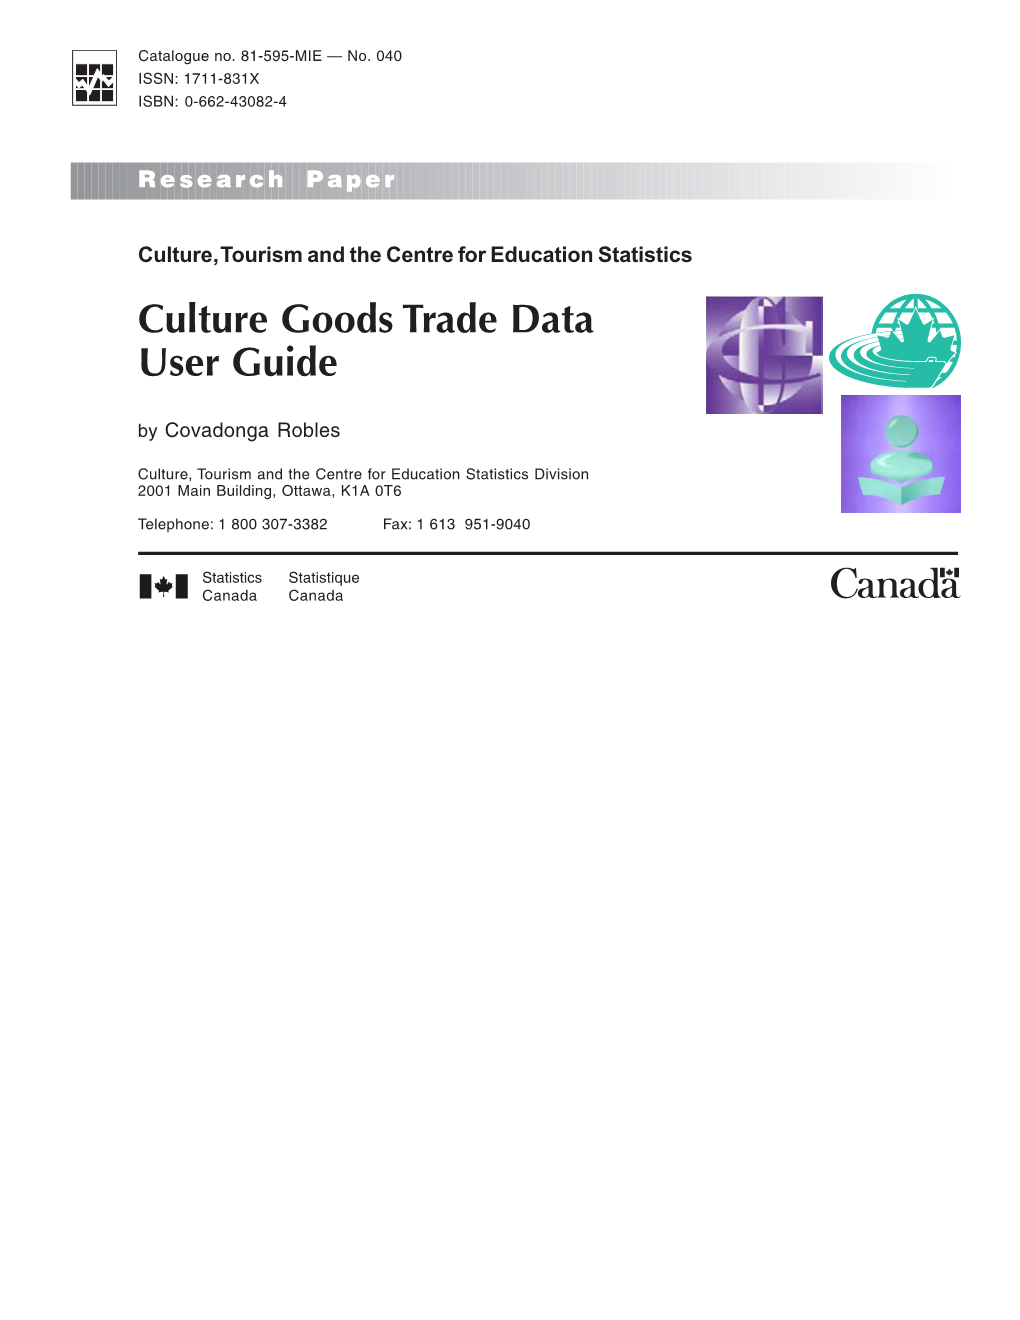 Culture Goods Trade Data User Guide by Covadonga Robles